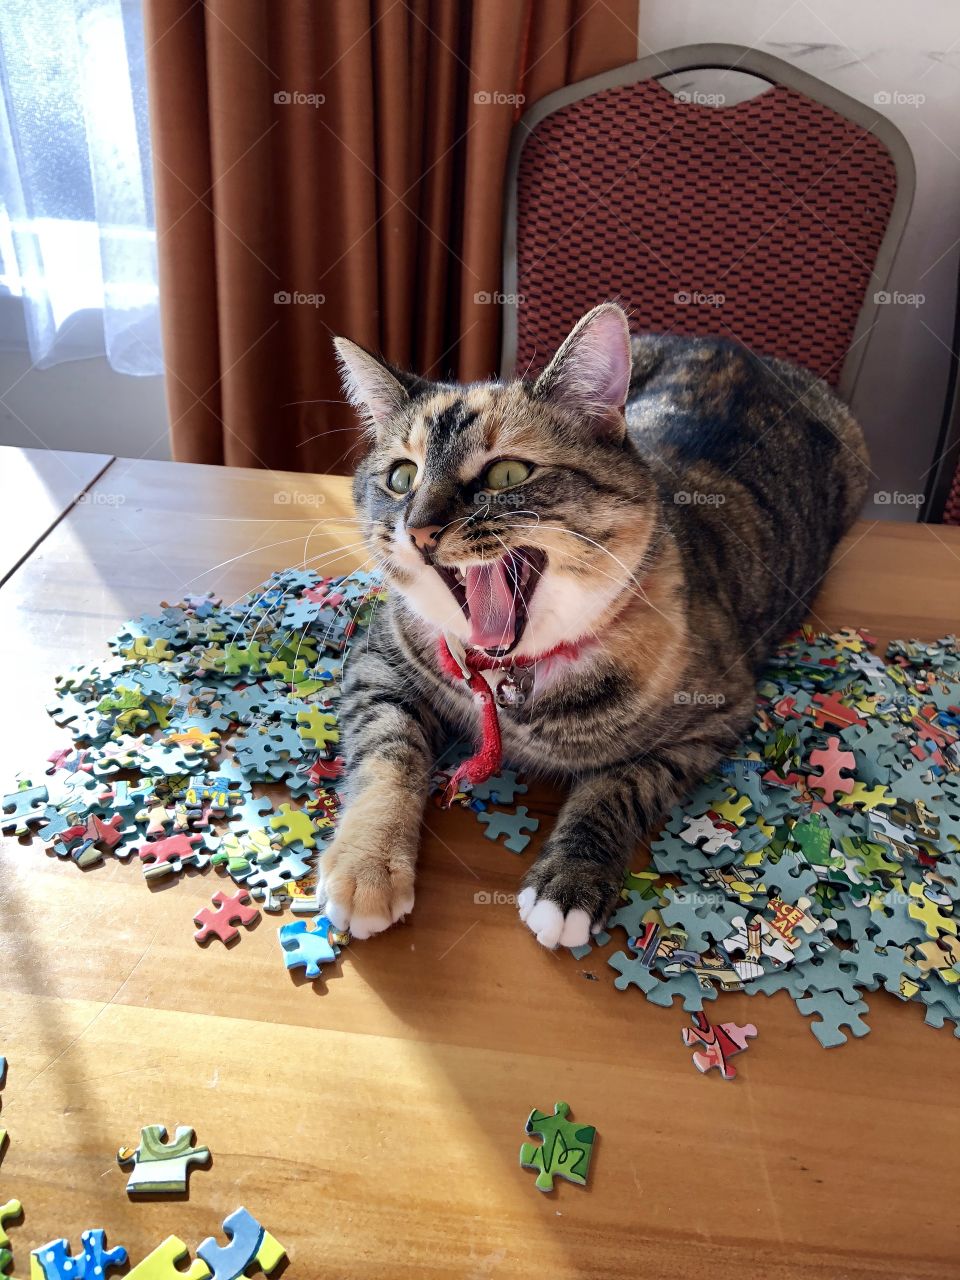 The cat looks vividly excited about starting this puzzle